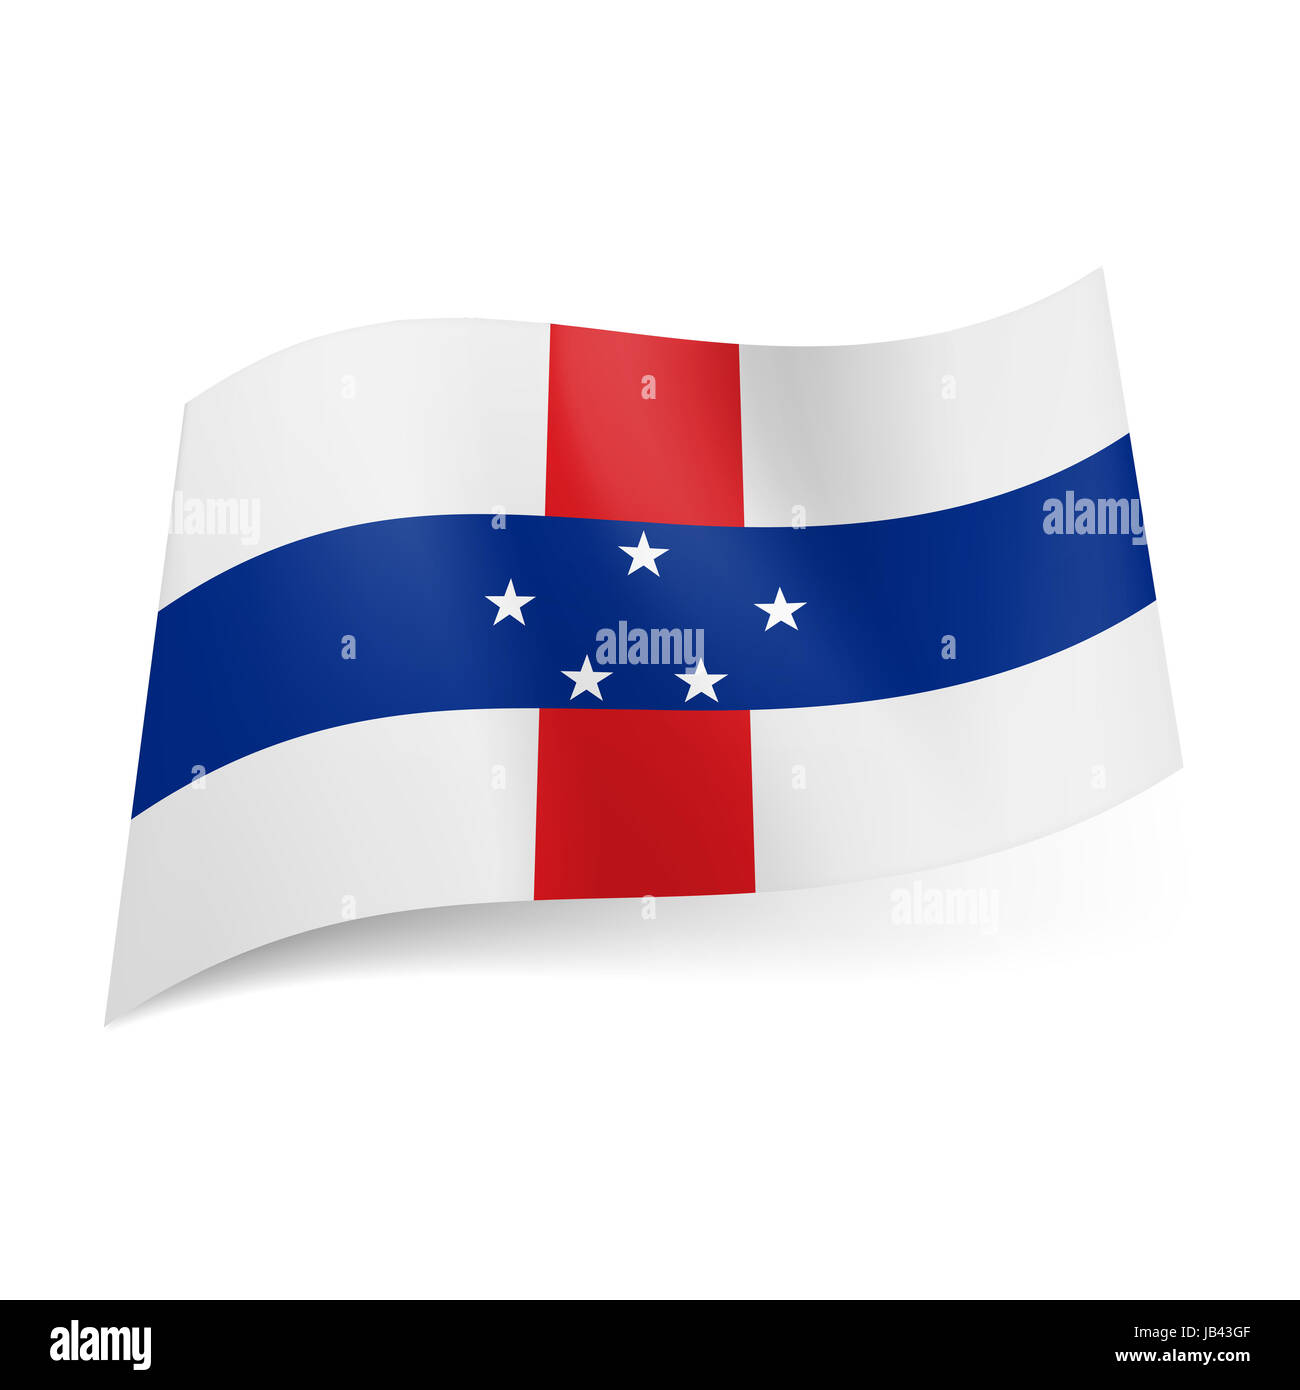 hver for sig tandpine Underskrift National flag of Netherlands Antilles: cross of red and blue stripes with  five stars on it on white background Stock Photo - Alamy